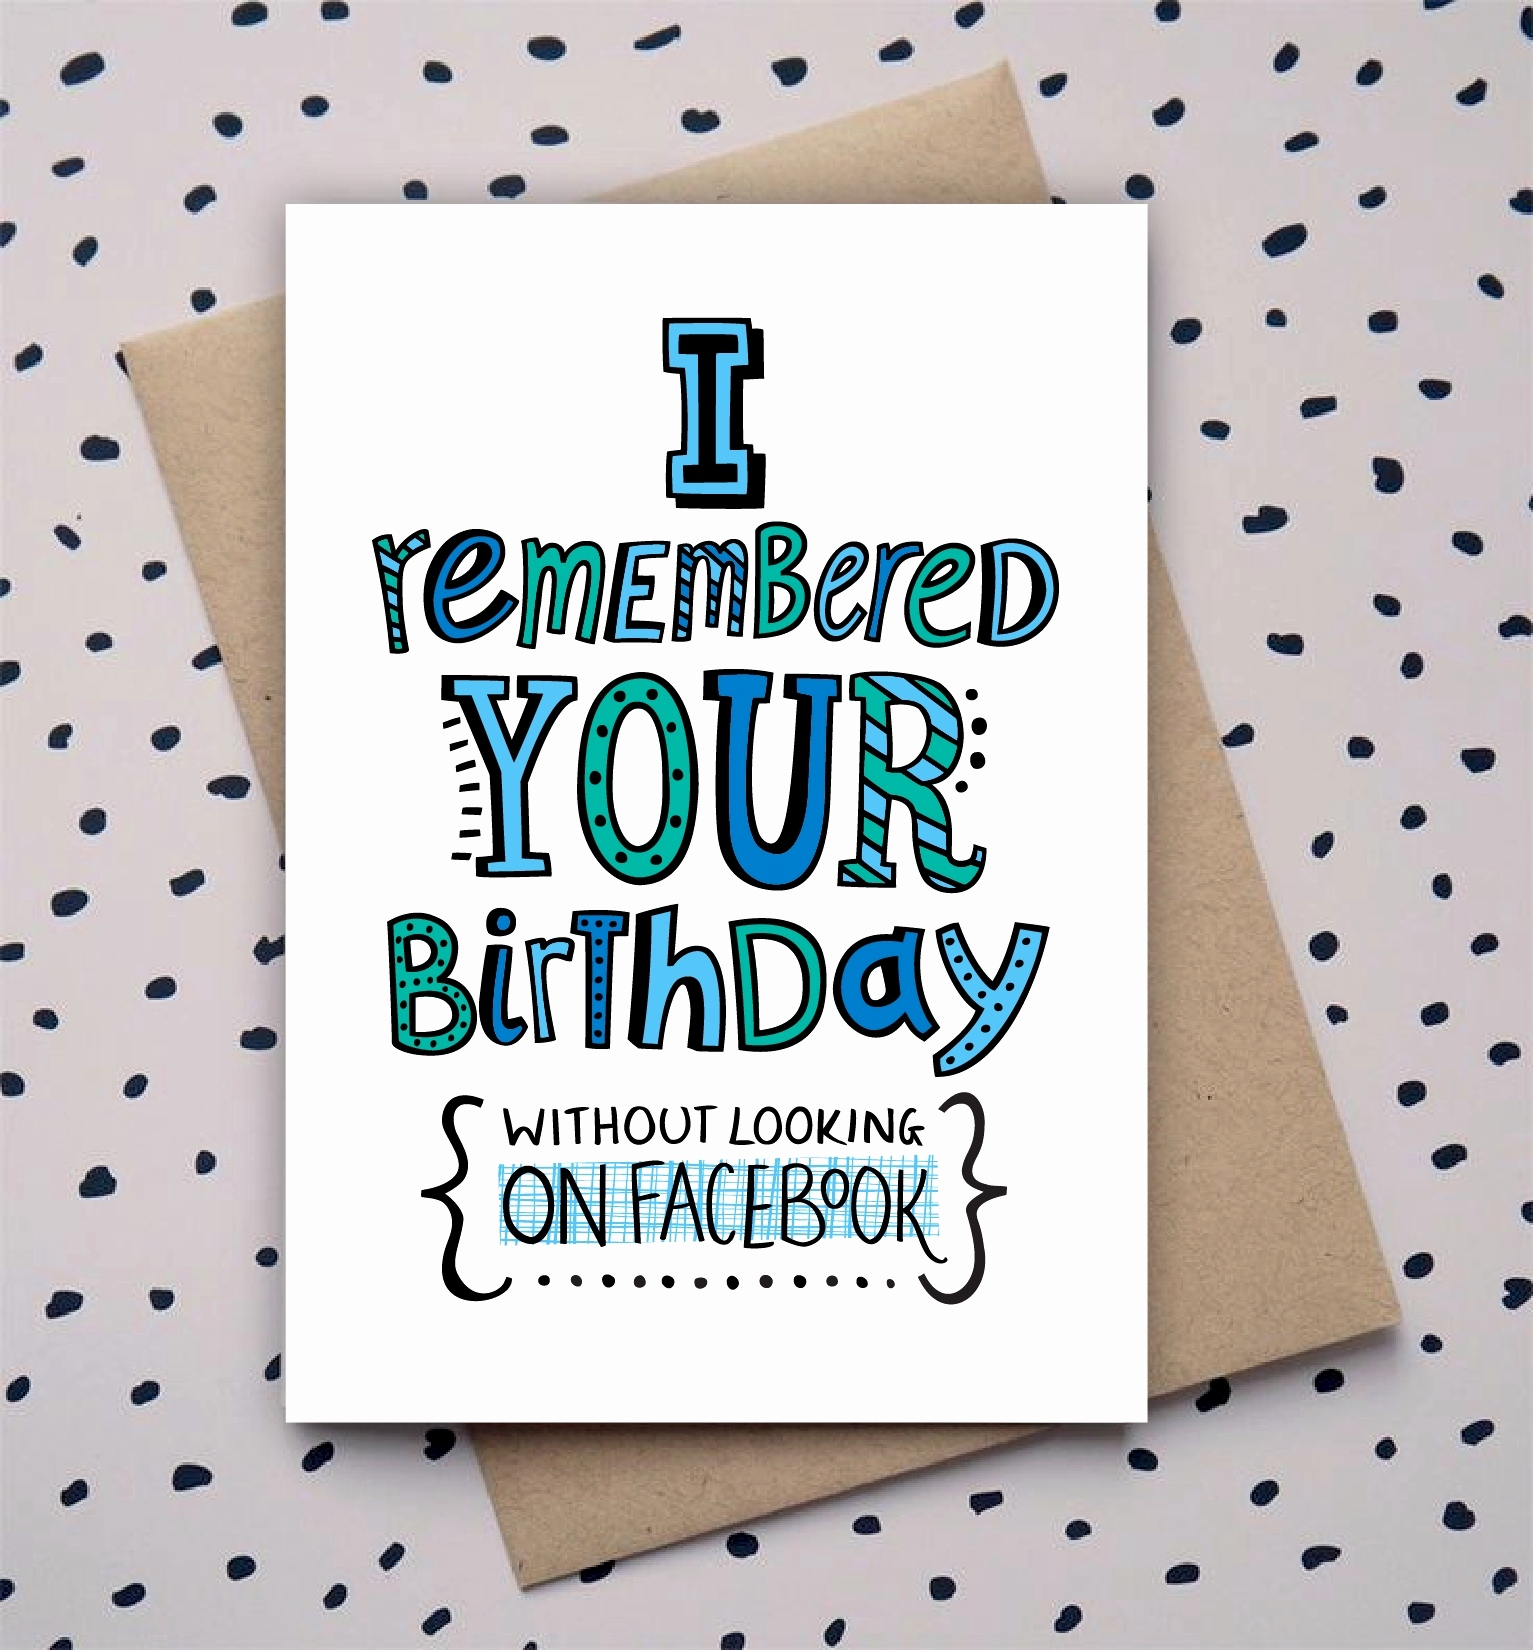 Birthday Card Ideas For Mother Birthday Card Ideas For Mom Funny Awesome Best 173 Funny To Me Ideas